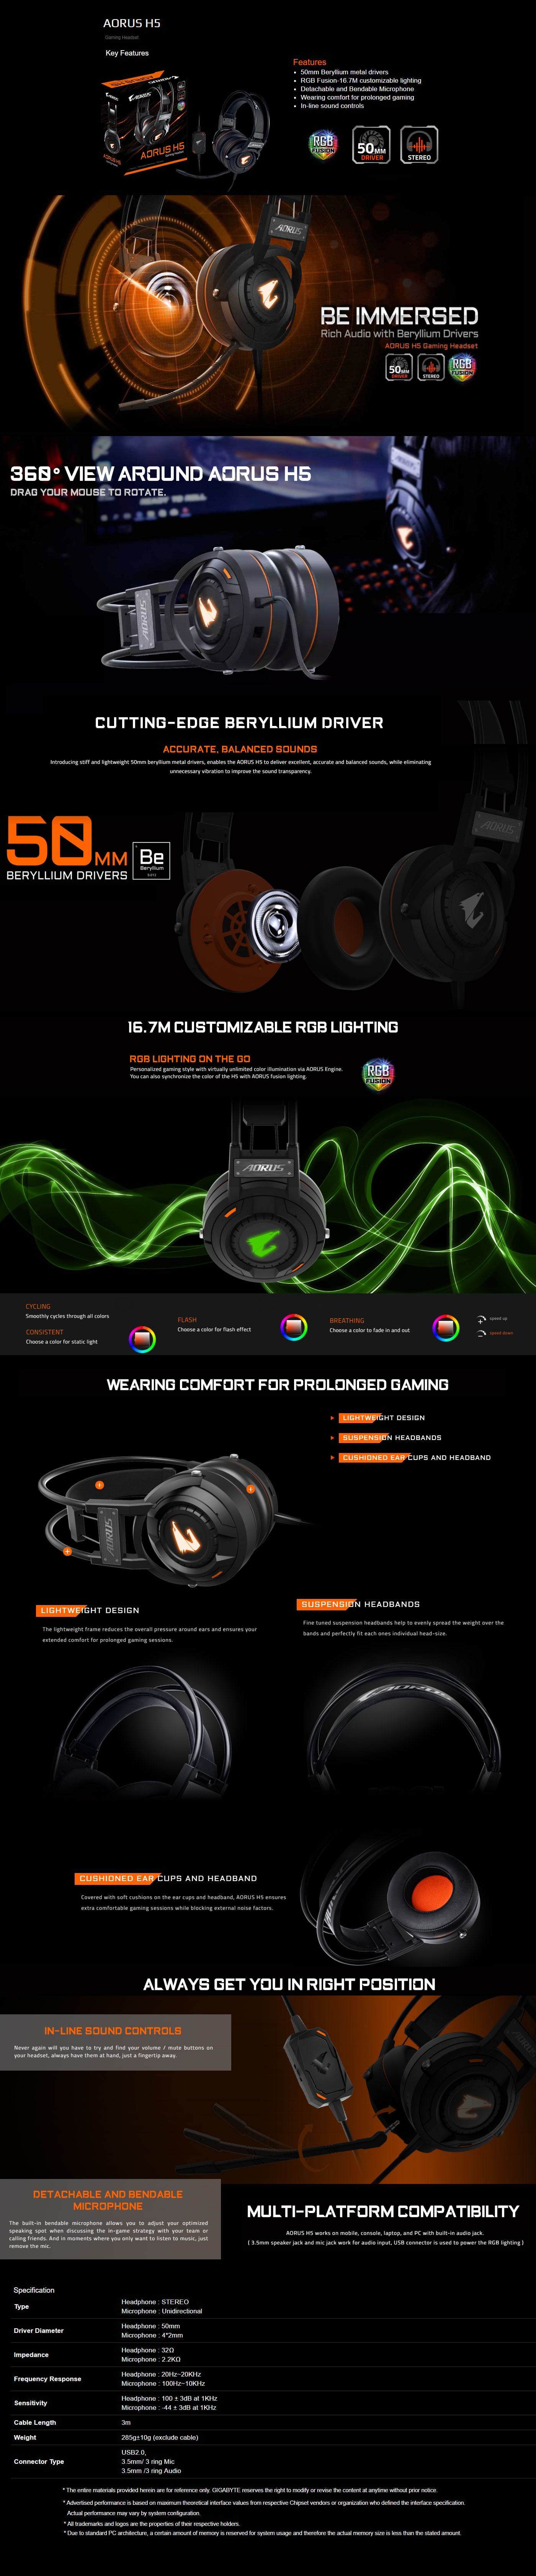 Gigabyte Aorus H5 Gaming Headset features